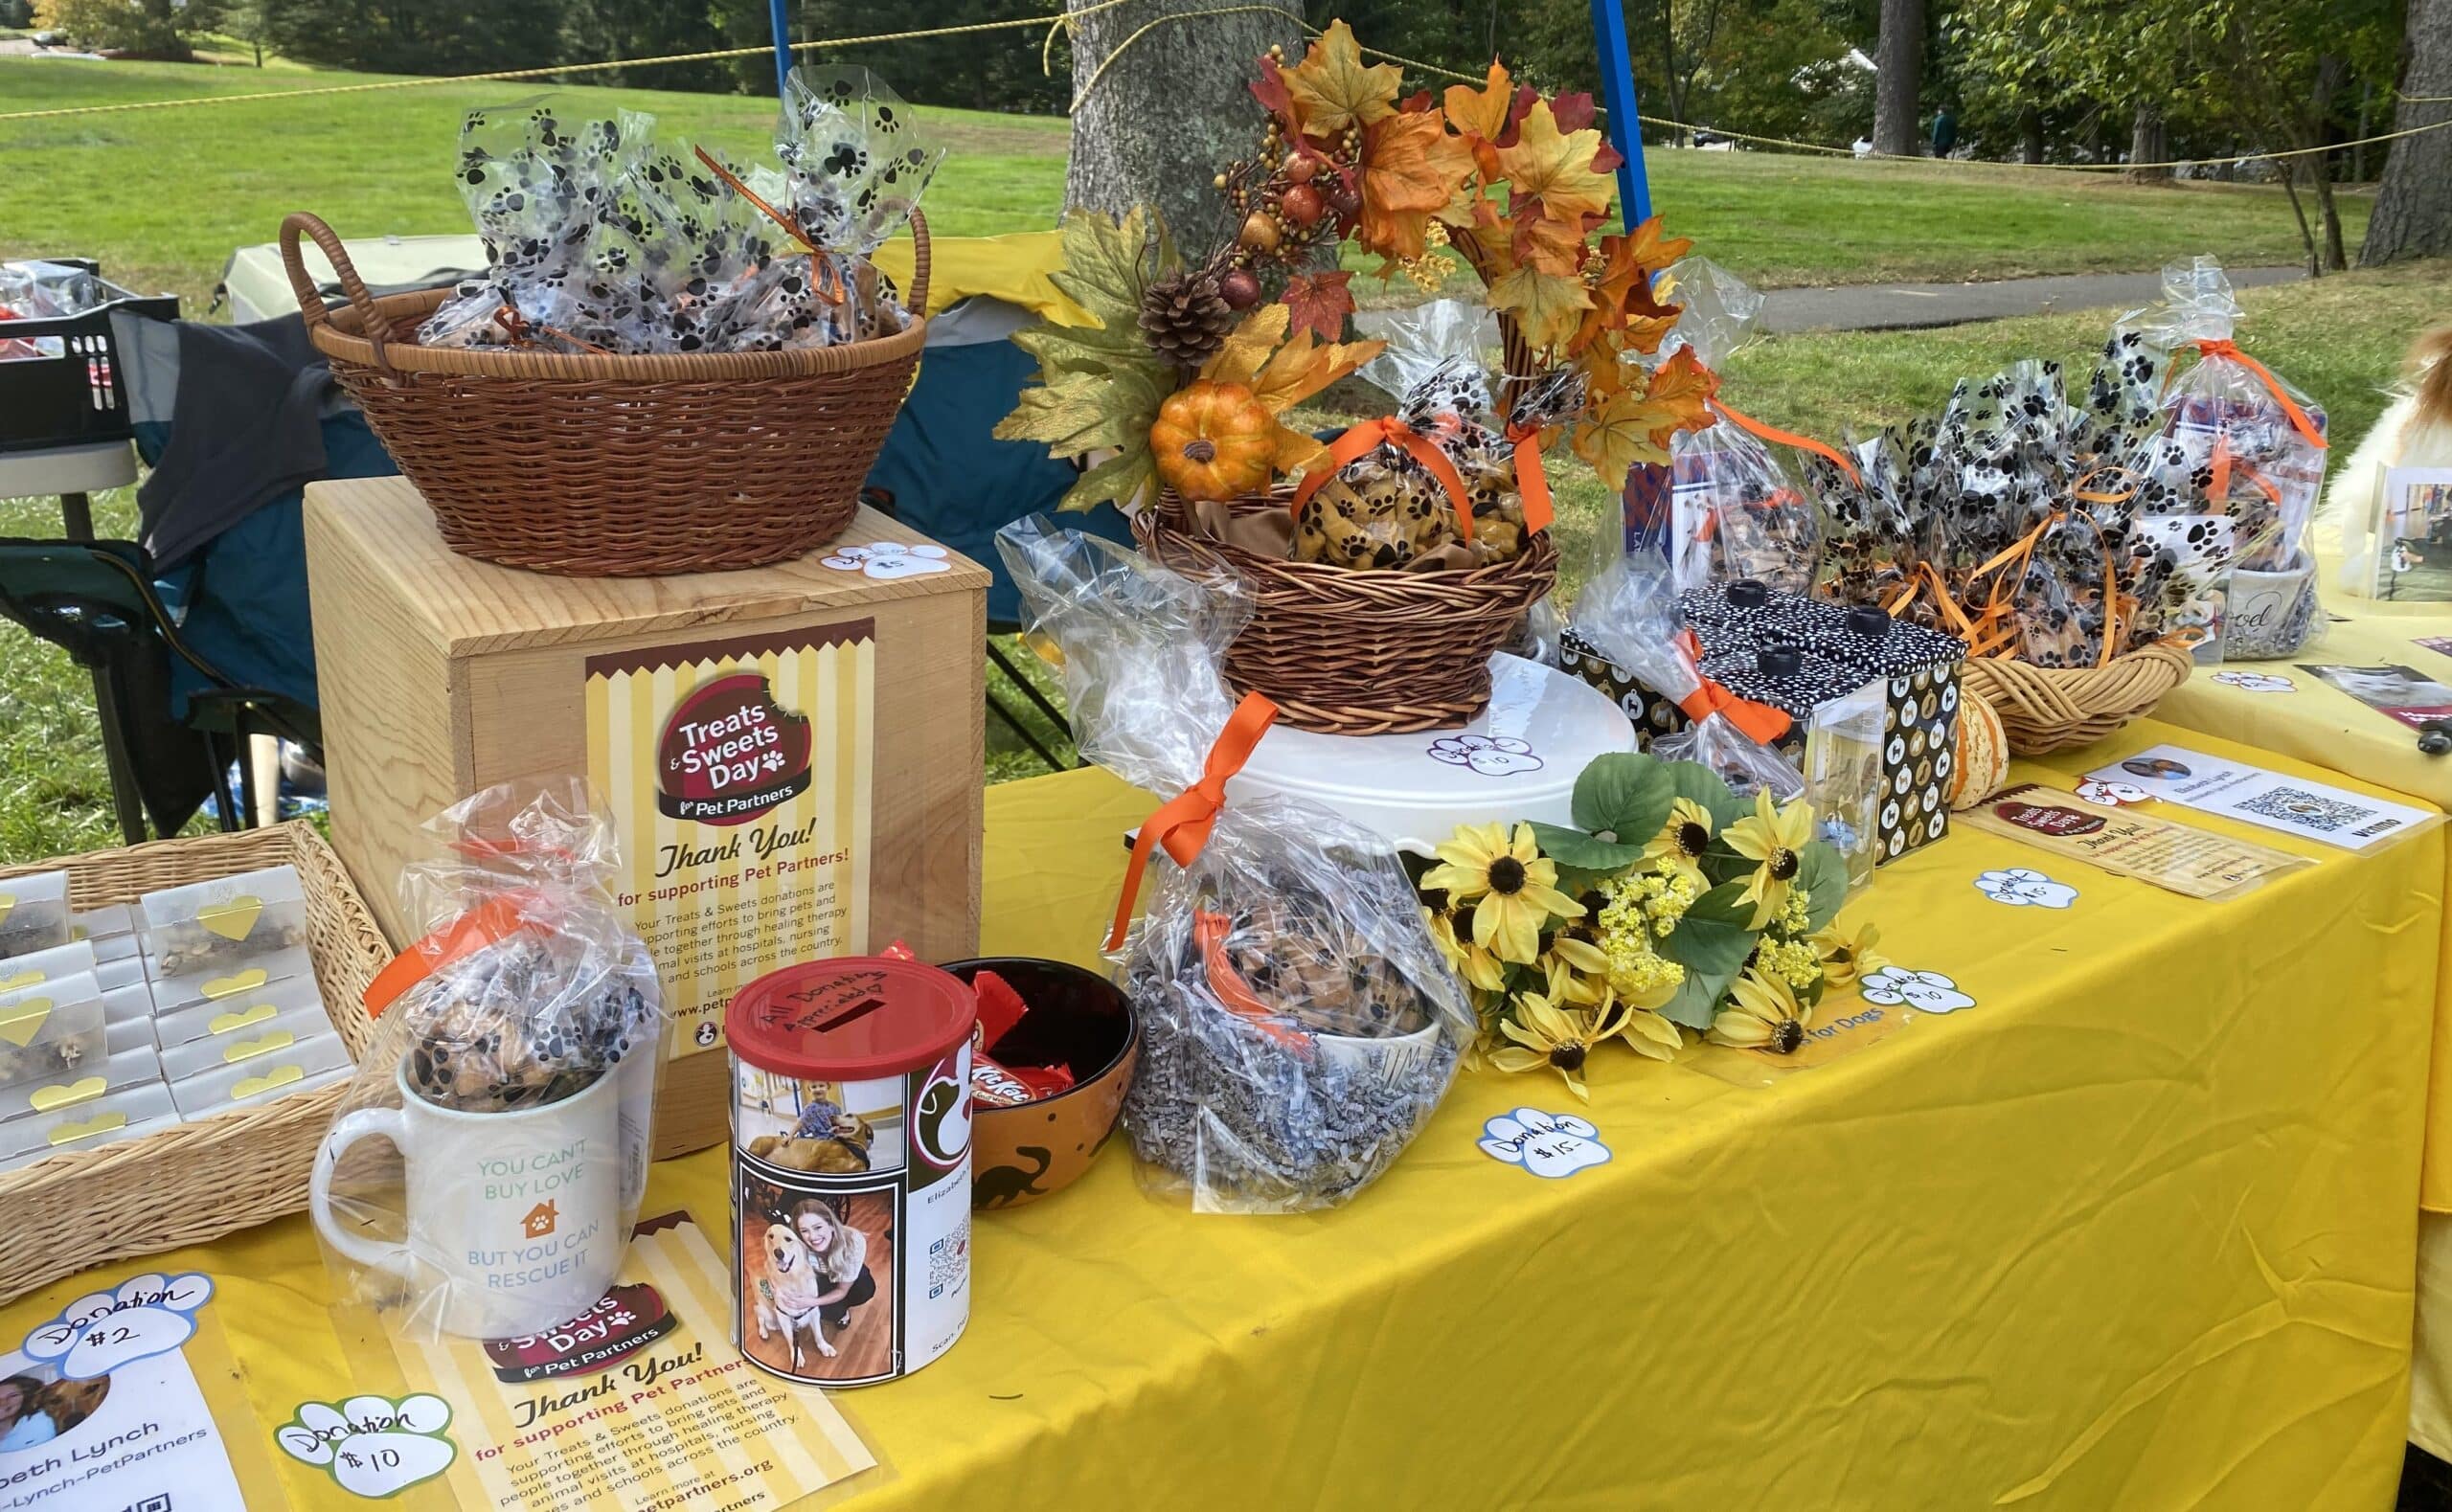 The Pet Partners bake sale table at the Westport Dog Festival.